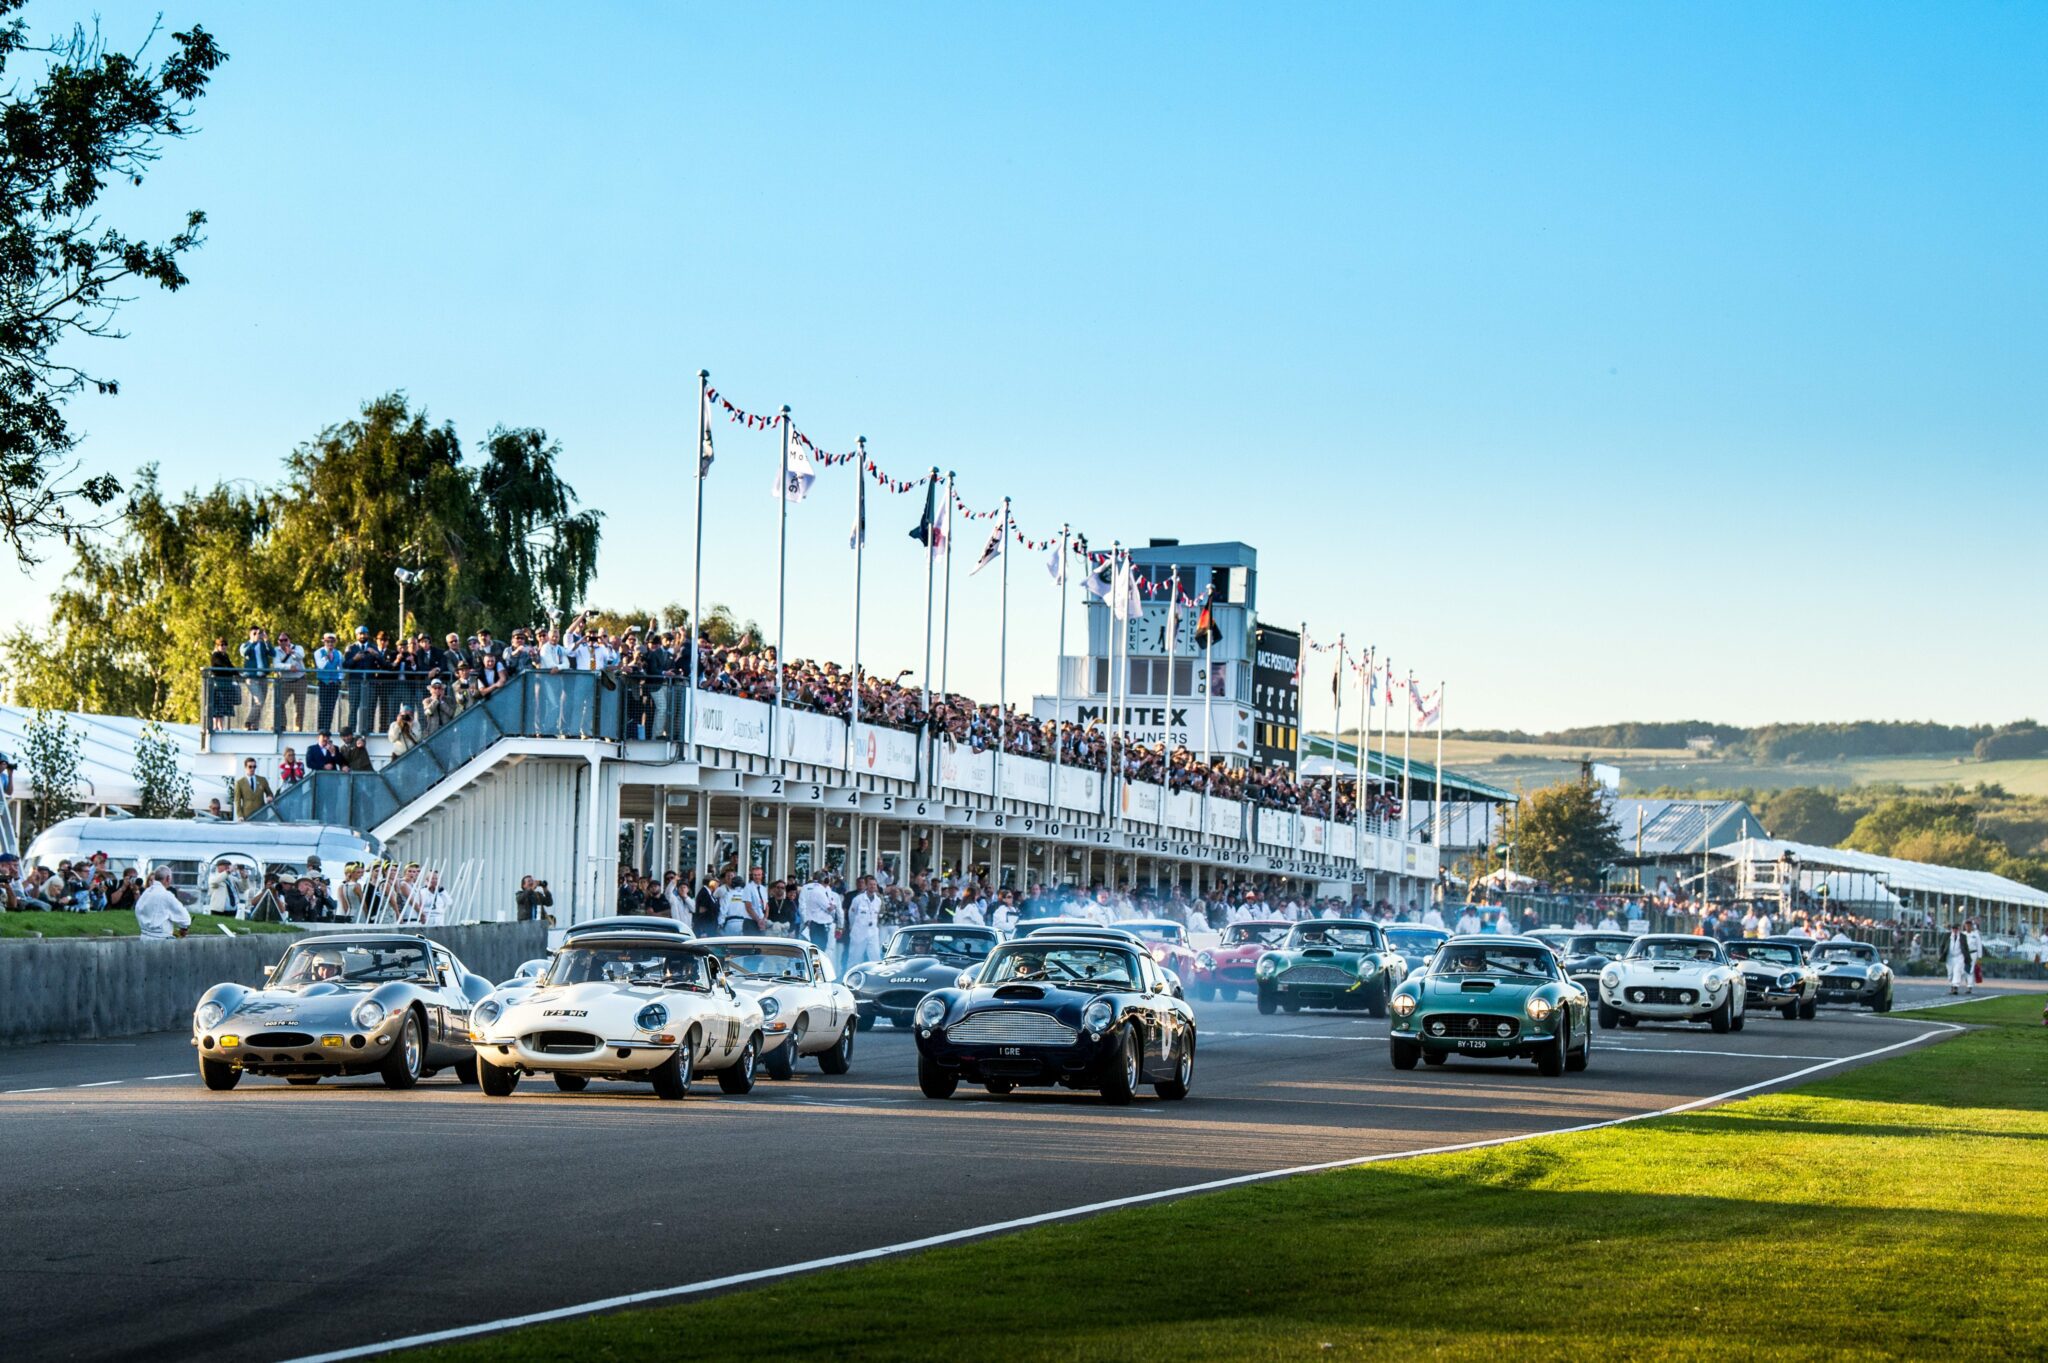 Cars racing on the racetrack at Goodwood